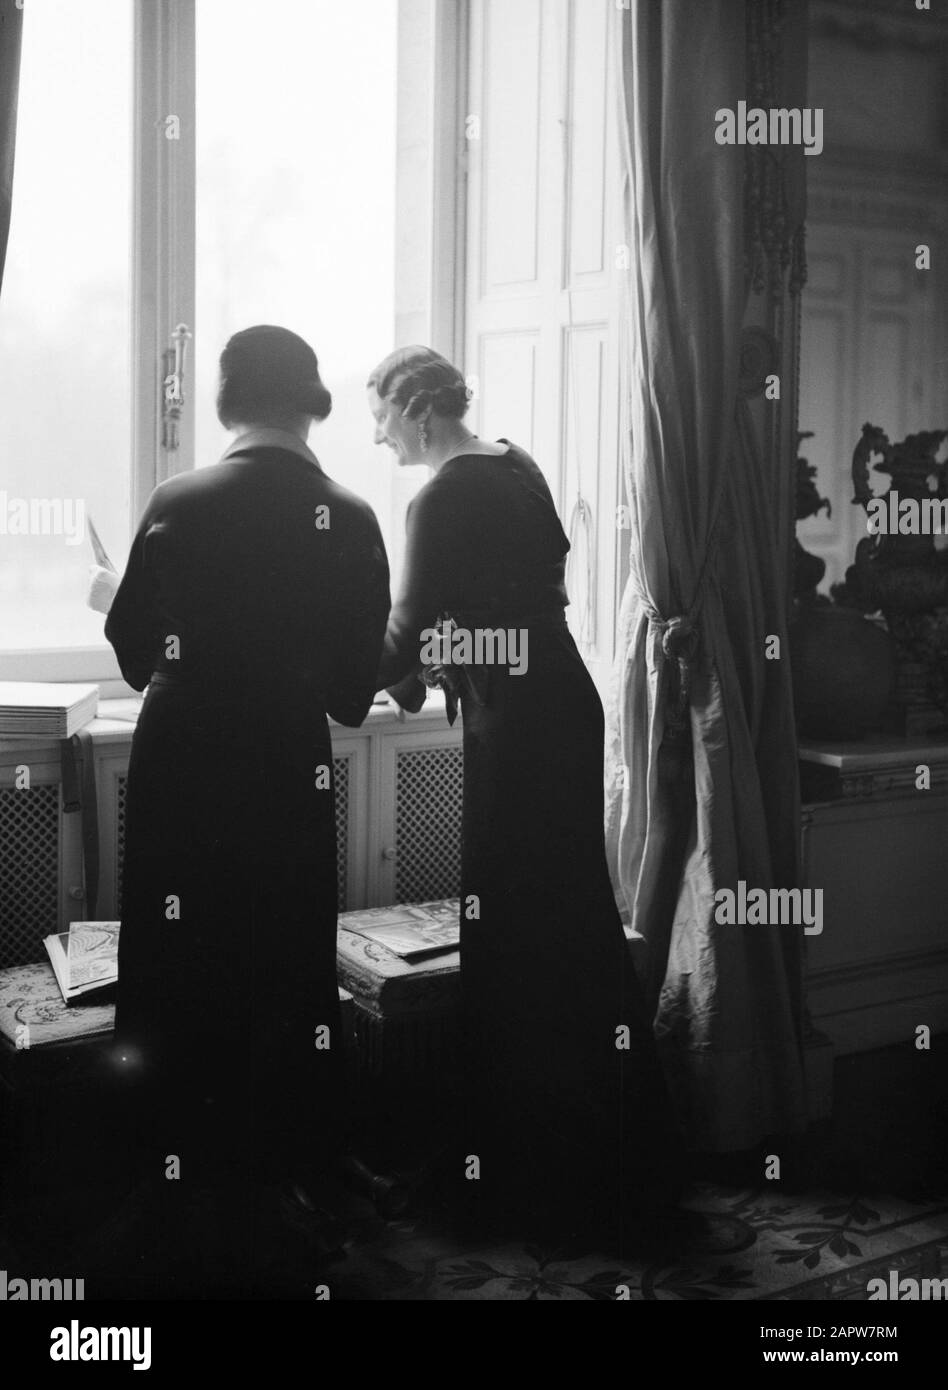 Royal Family Belgium  Queen Astrid of Belgium with an assistant Date: 1935 Keywords: queens, palaces Personal name: Queen Astrid of Belgium Stock Photo